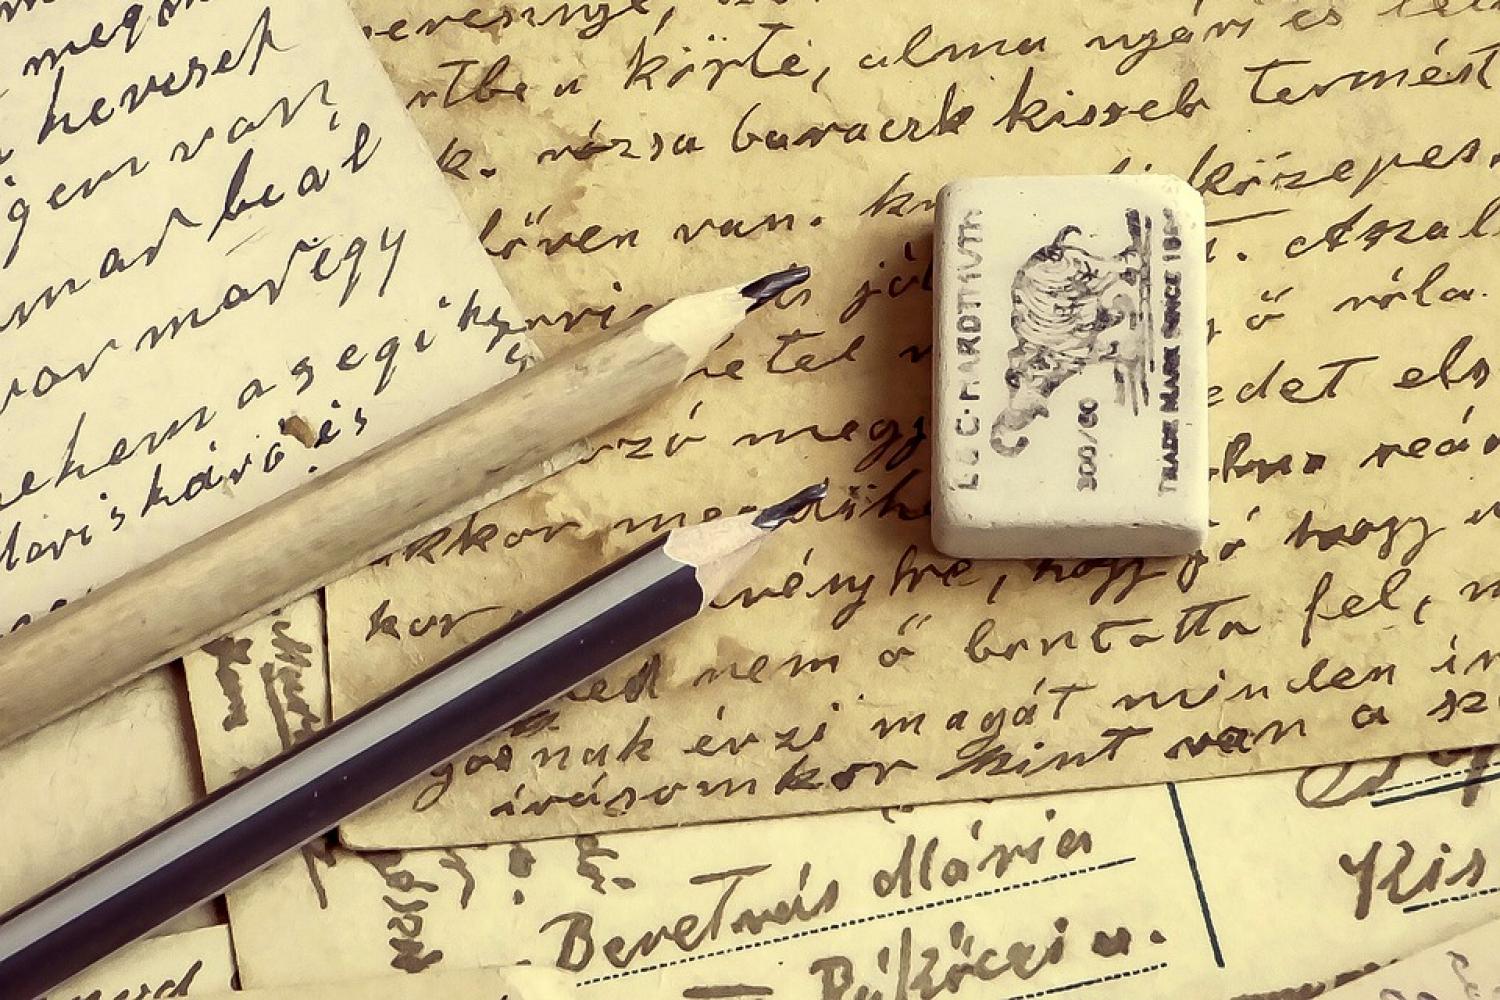 image of pencils, an eraser, and paper with cursive writing on it. 